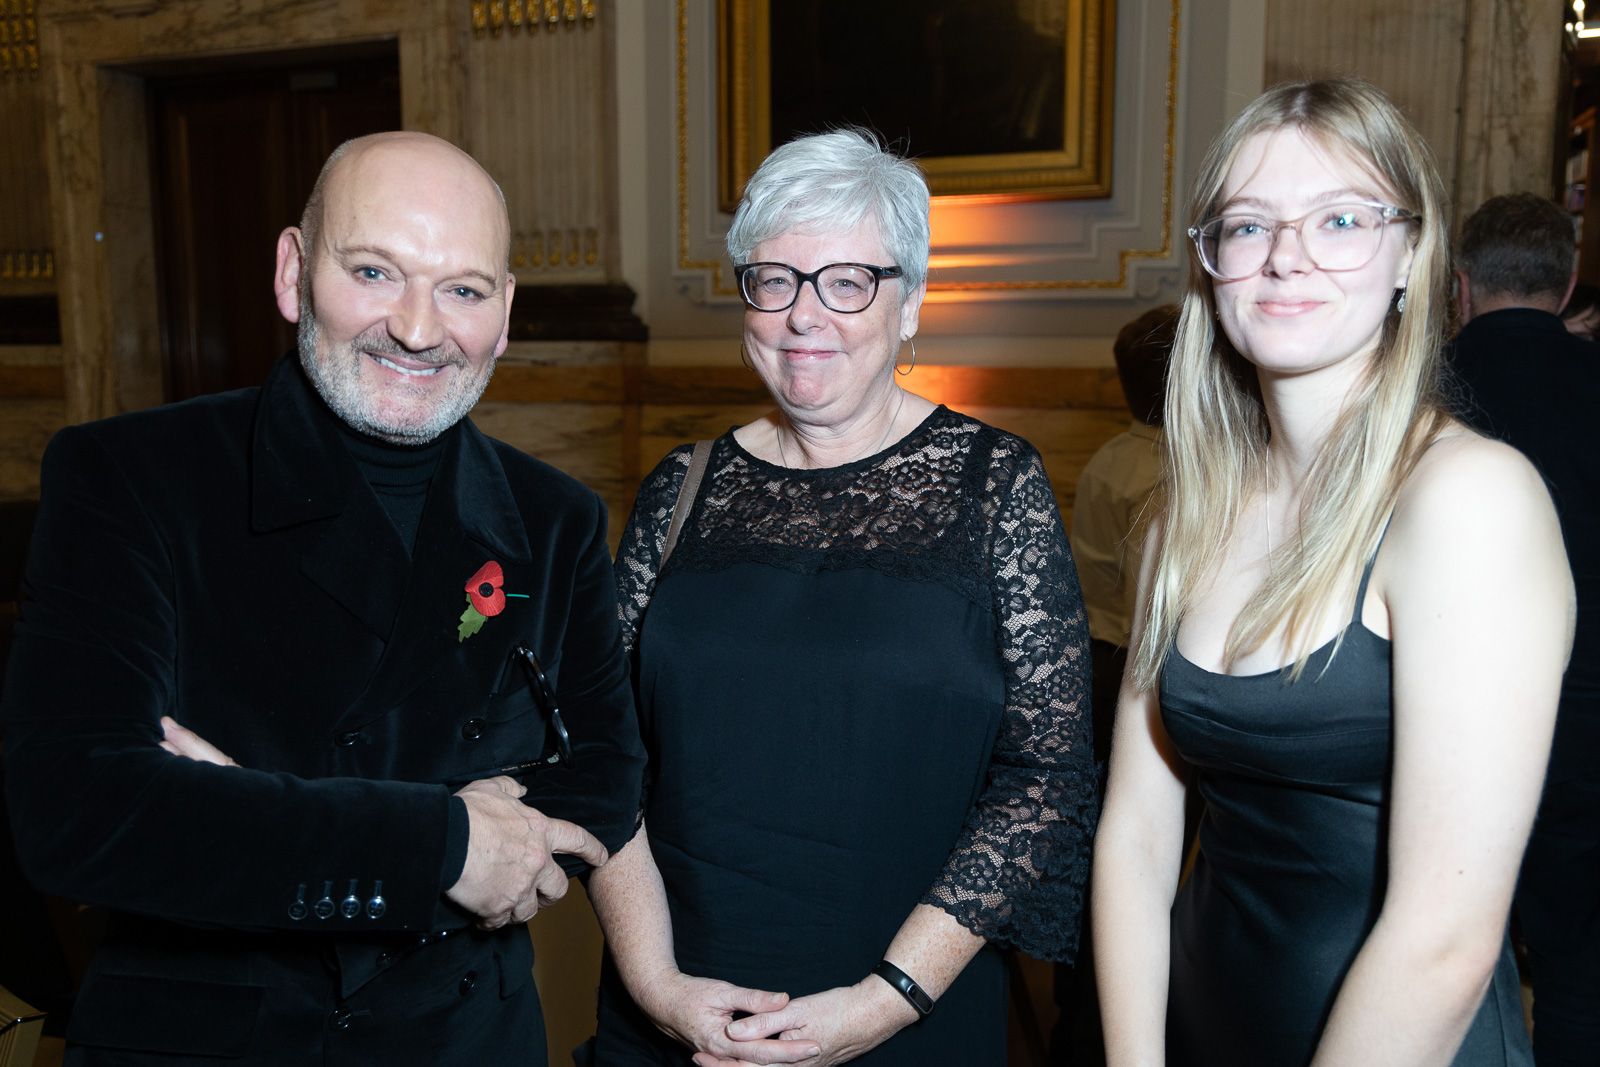 Ellen Fincher with Ben Frow, Director of Programming Channel 5 and VCBS UK, image Paul Hampartsoumian